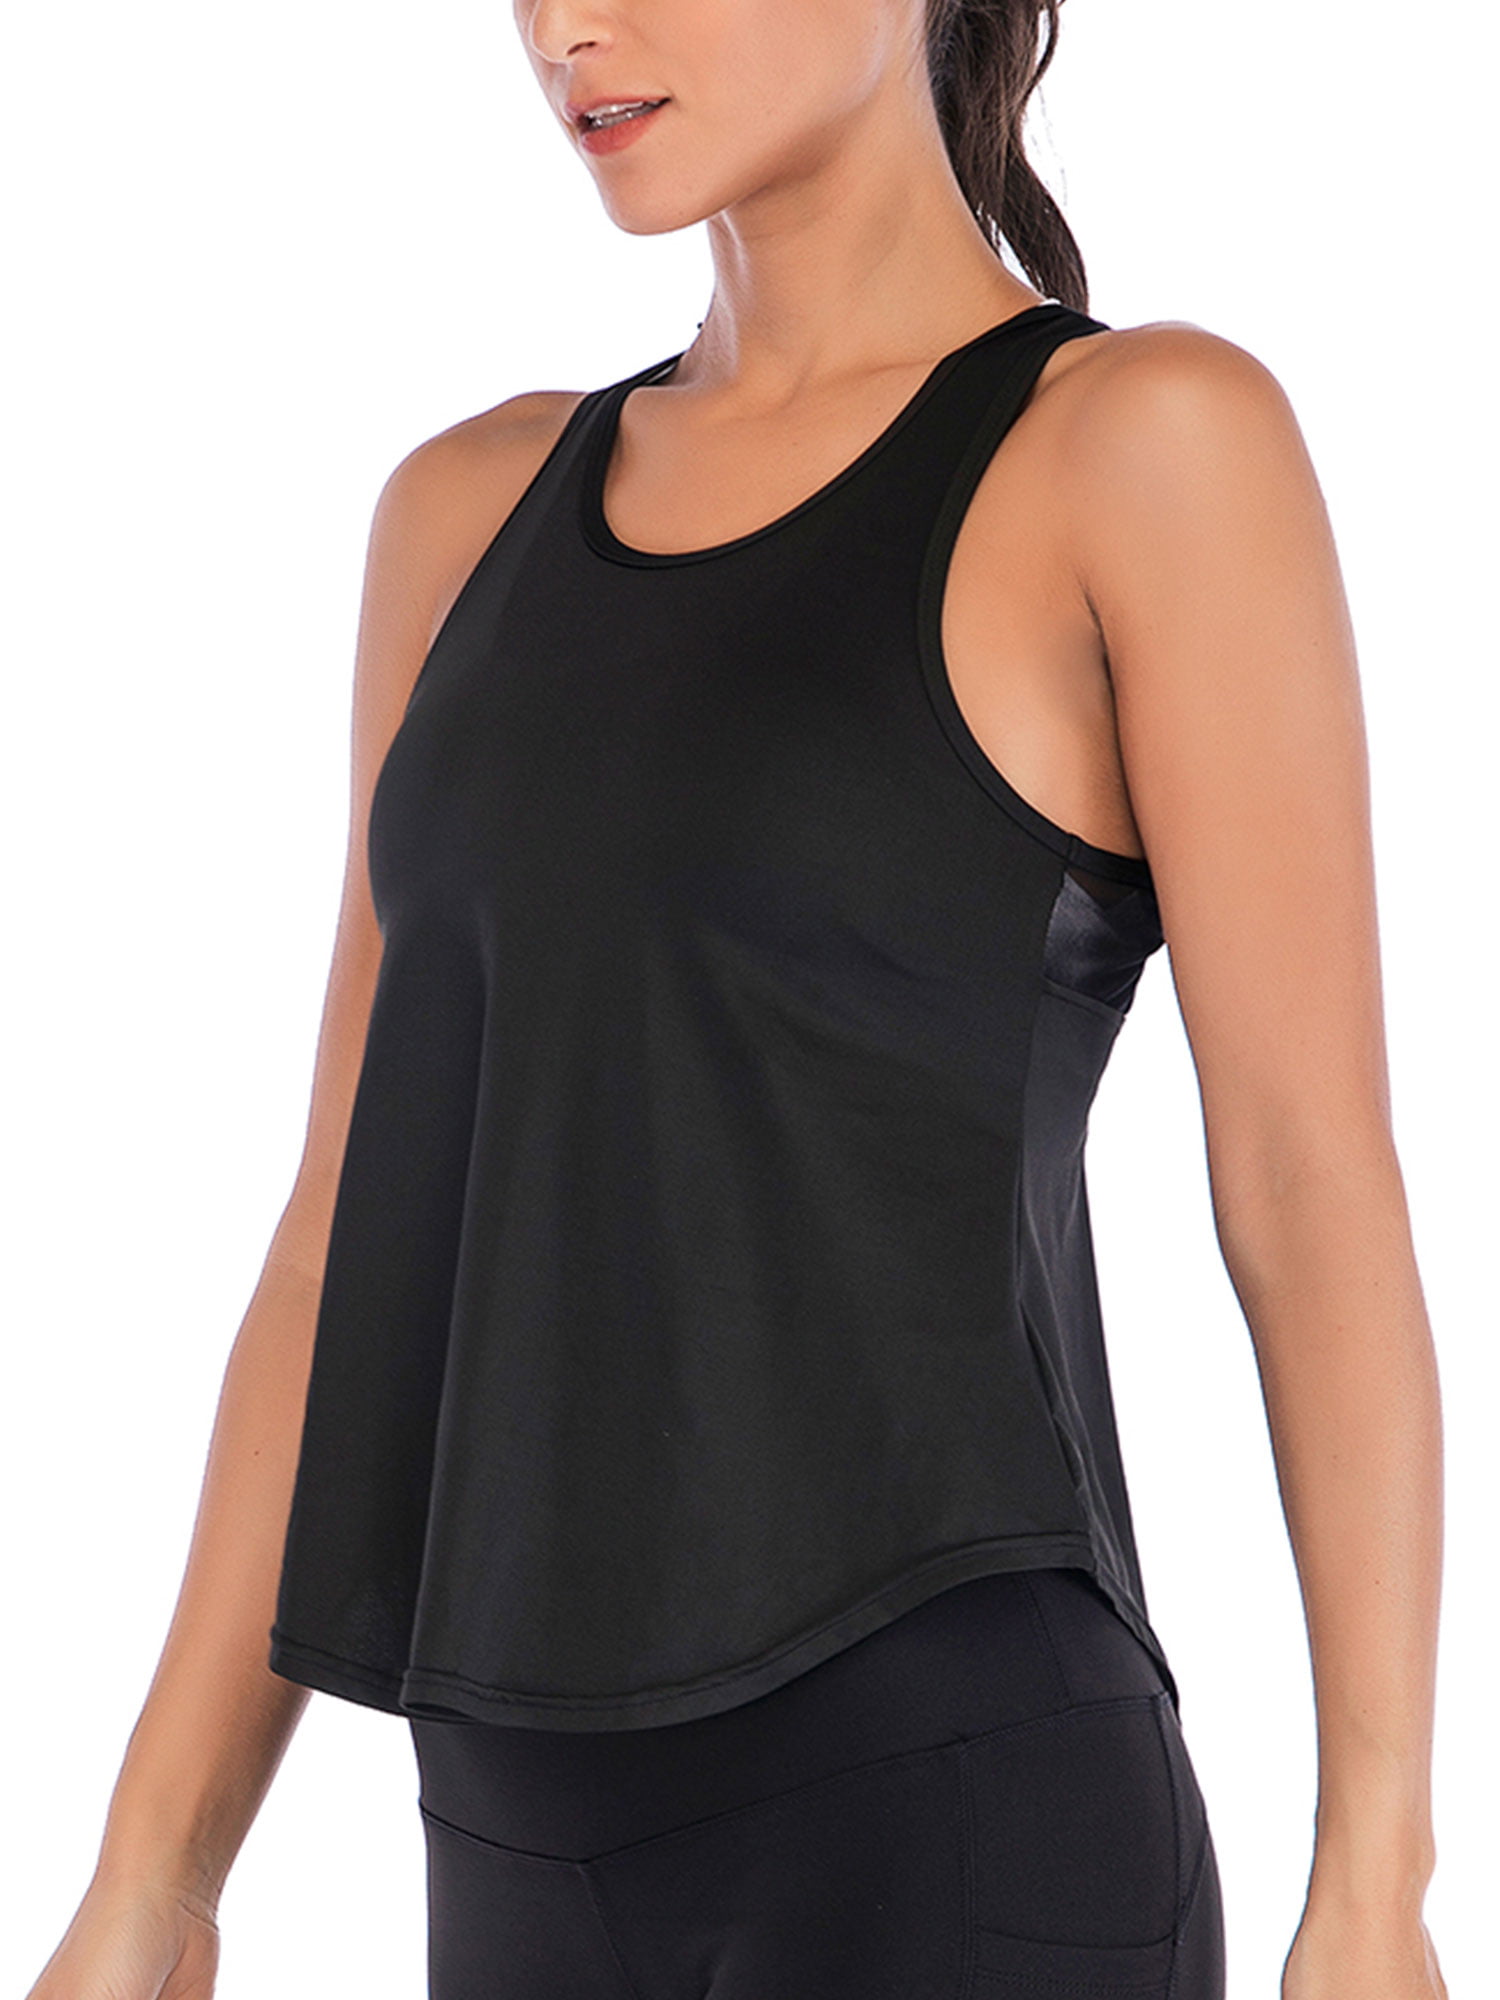 Womens Tank Top Mesh Vest Sleeveless T-Shirt Active Fitness Top Active Gym 